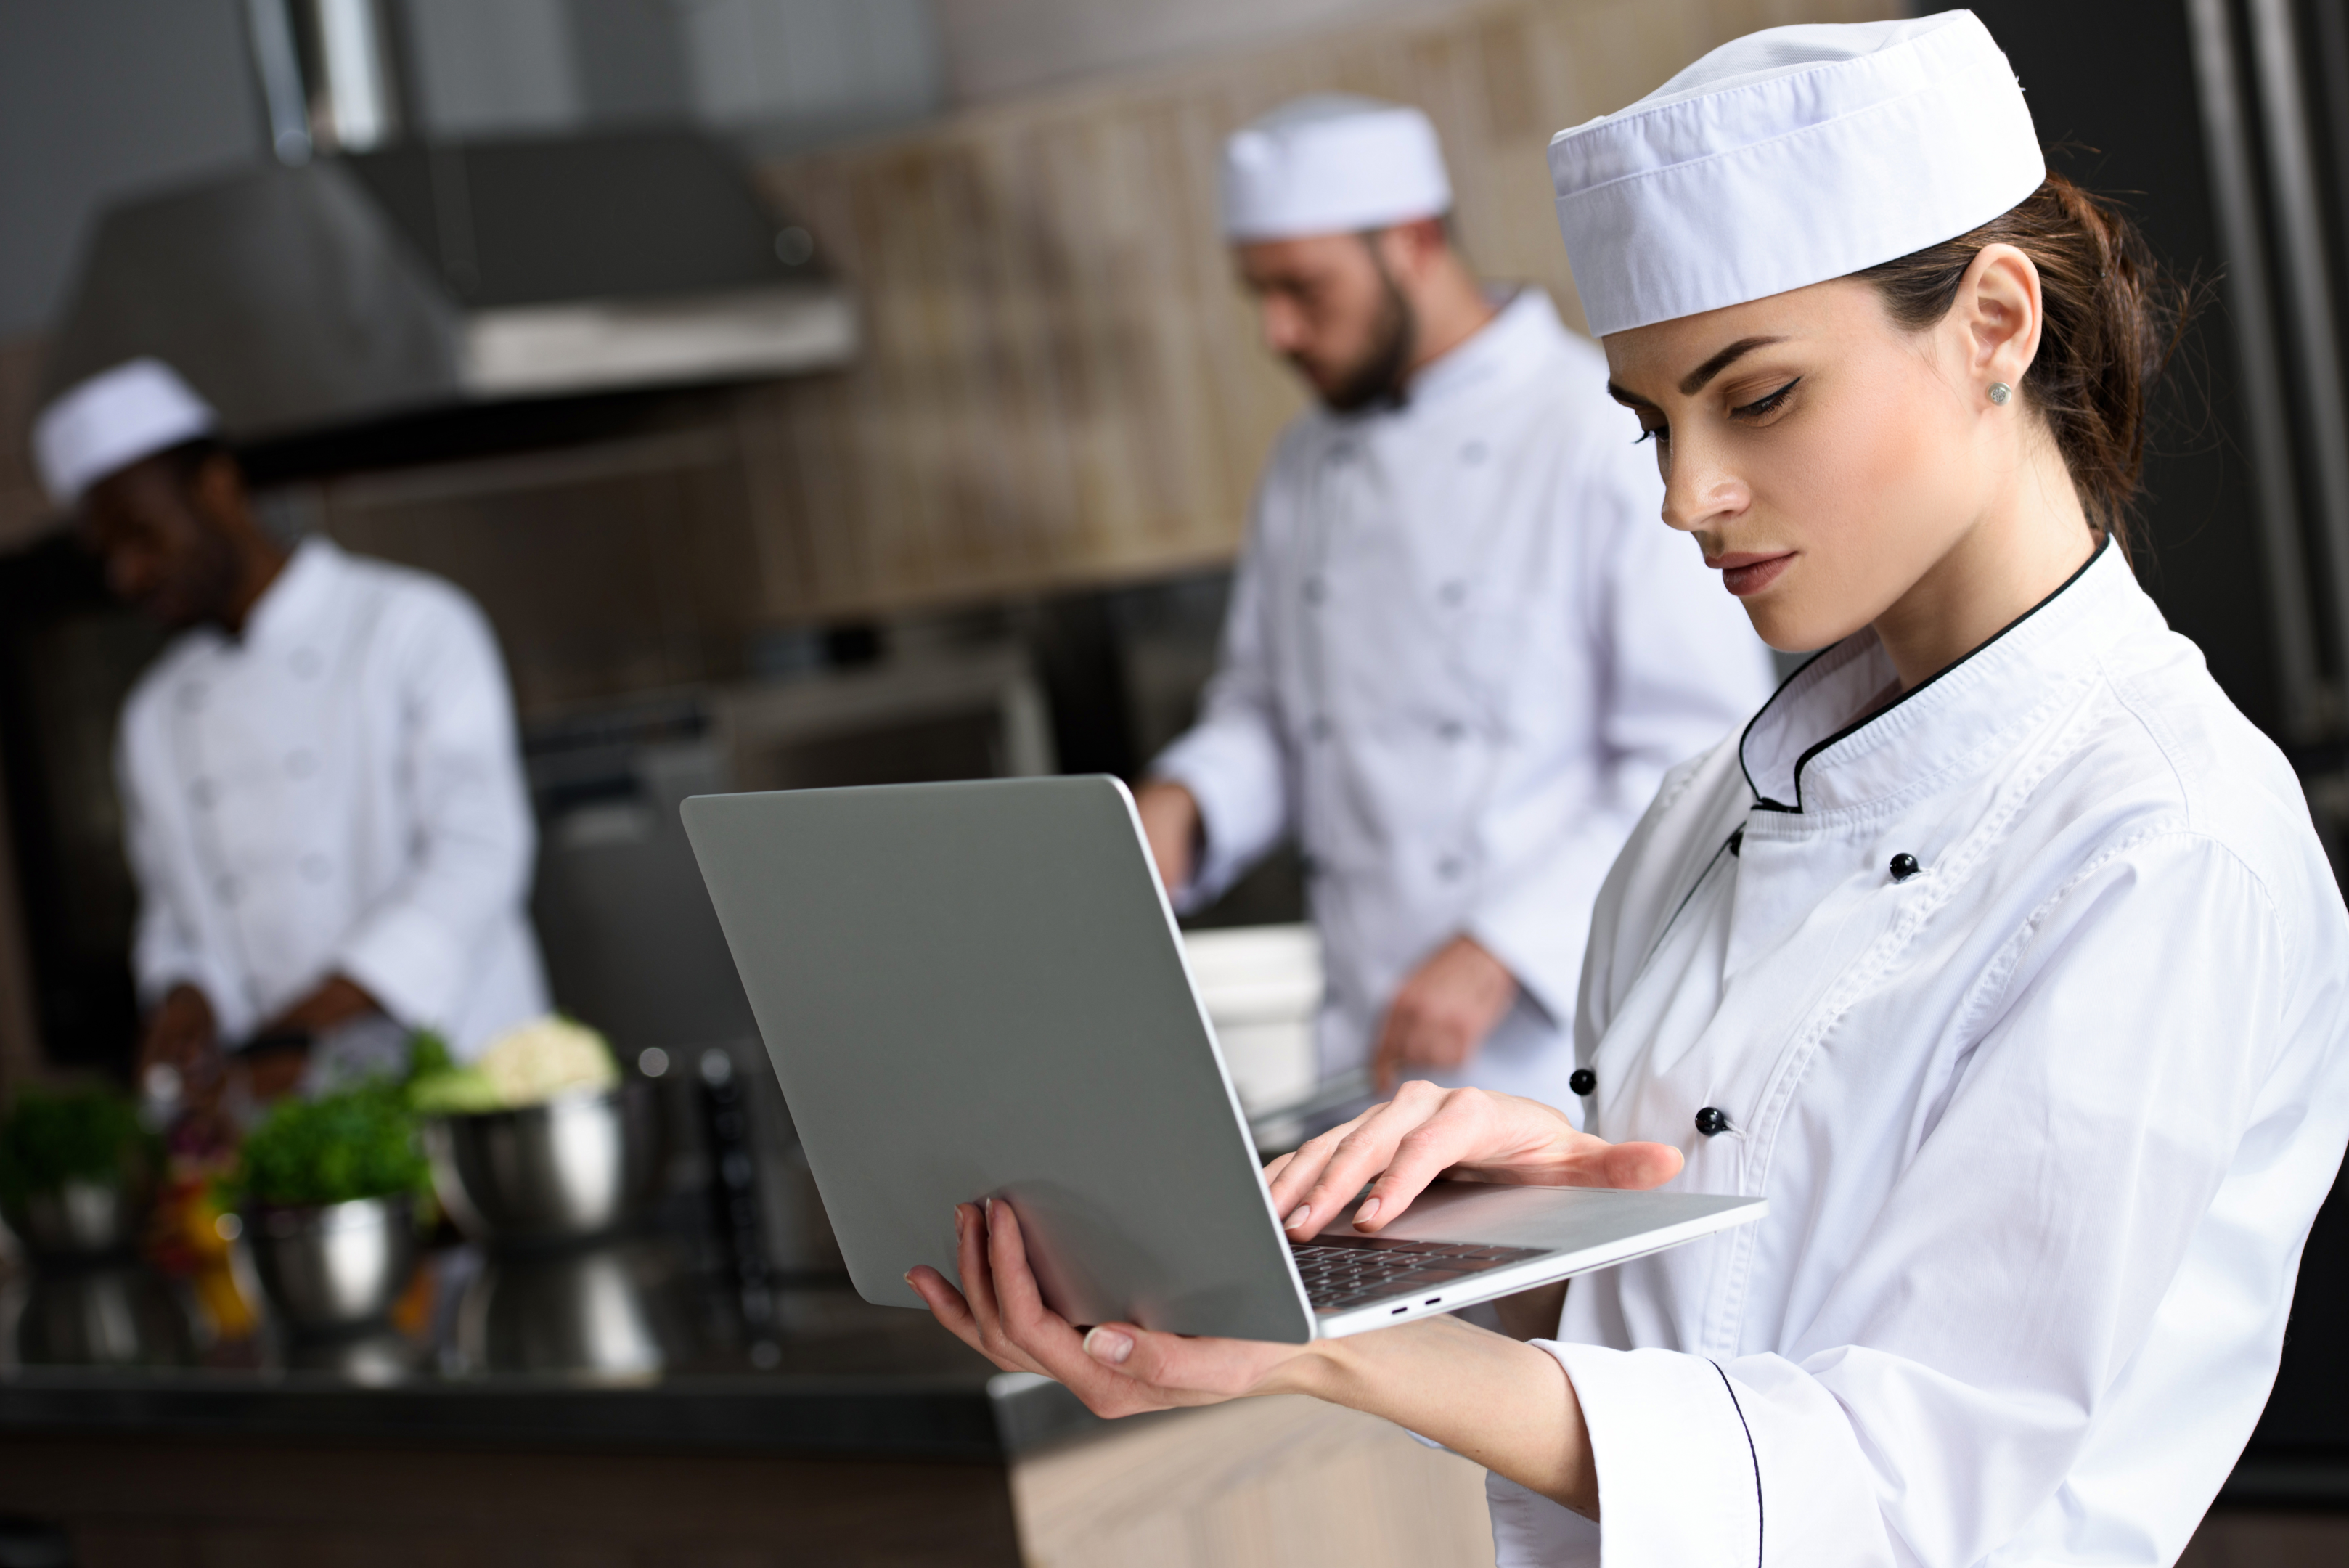 A chef looking at a restaurant's paid advertisement on social media